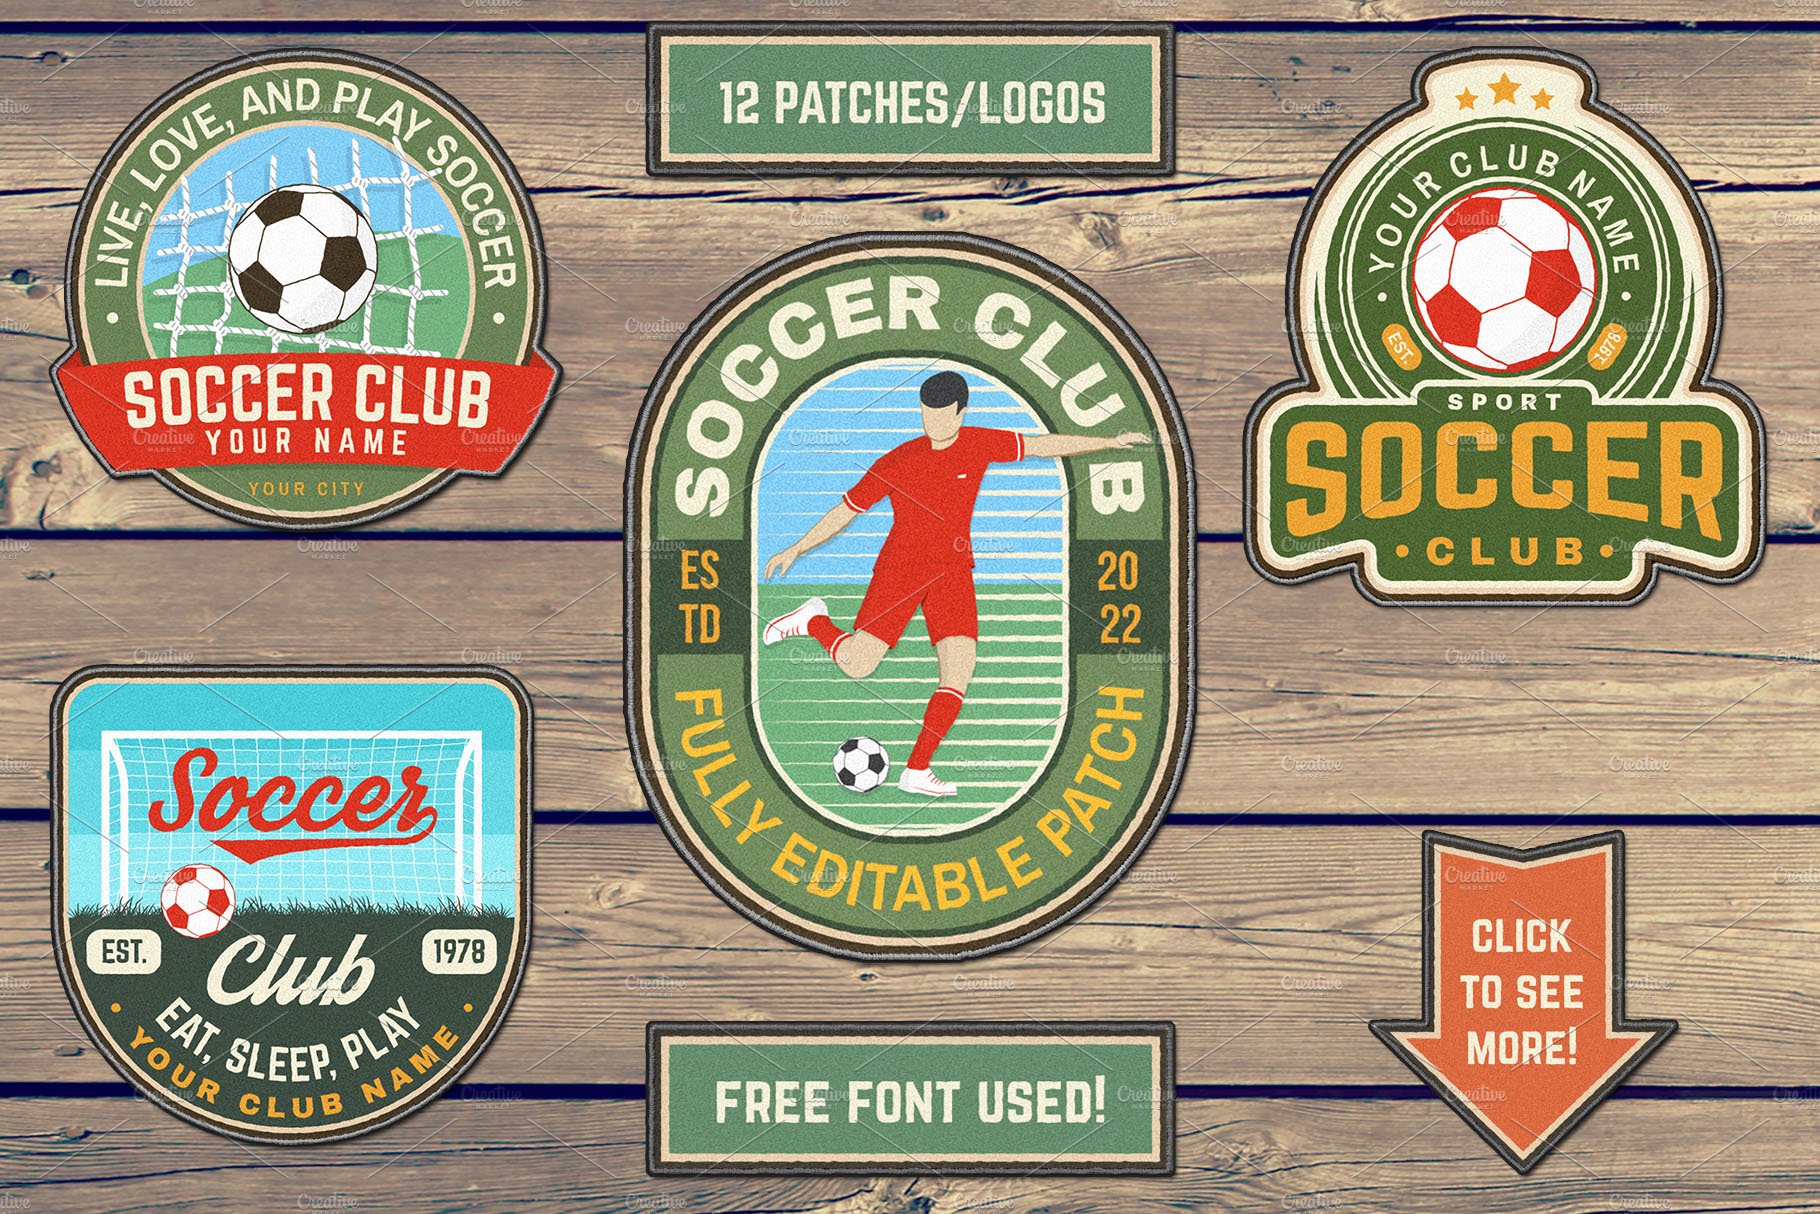 Soccer Club Patches/Logos cover image.